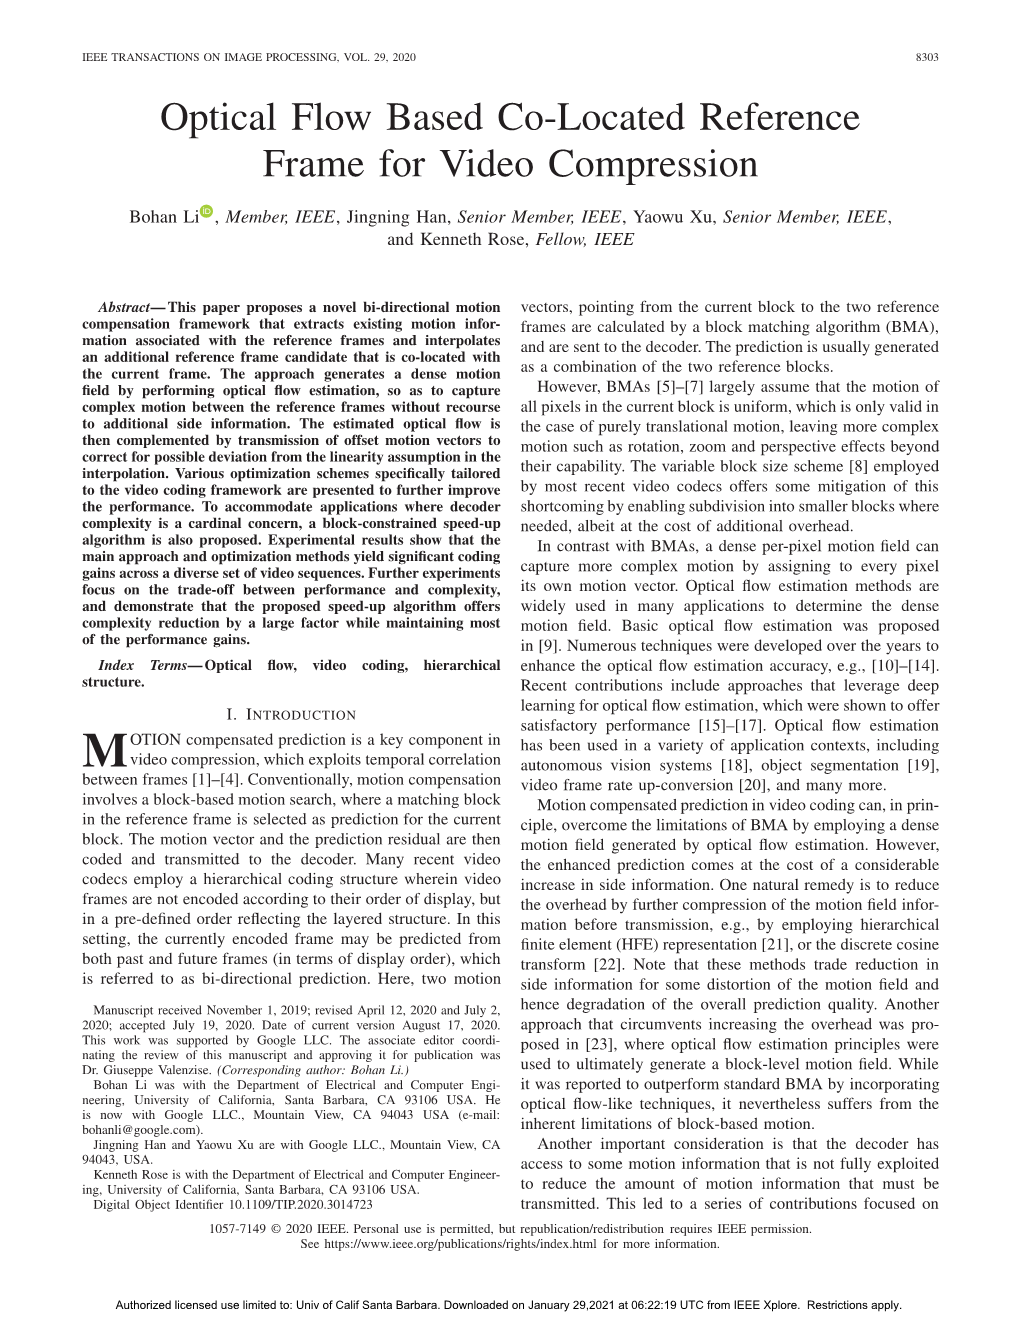 Optical Flow Based Co-Located Reference Frame for Video Compression